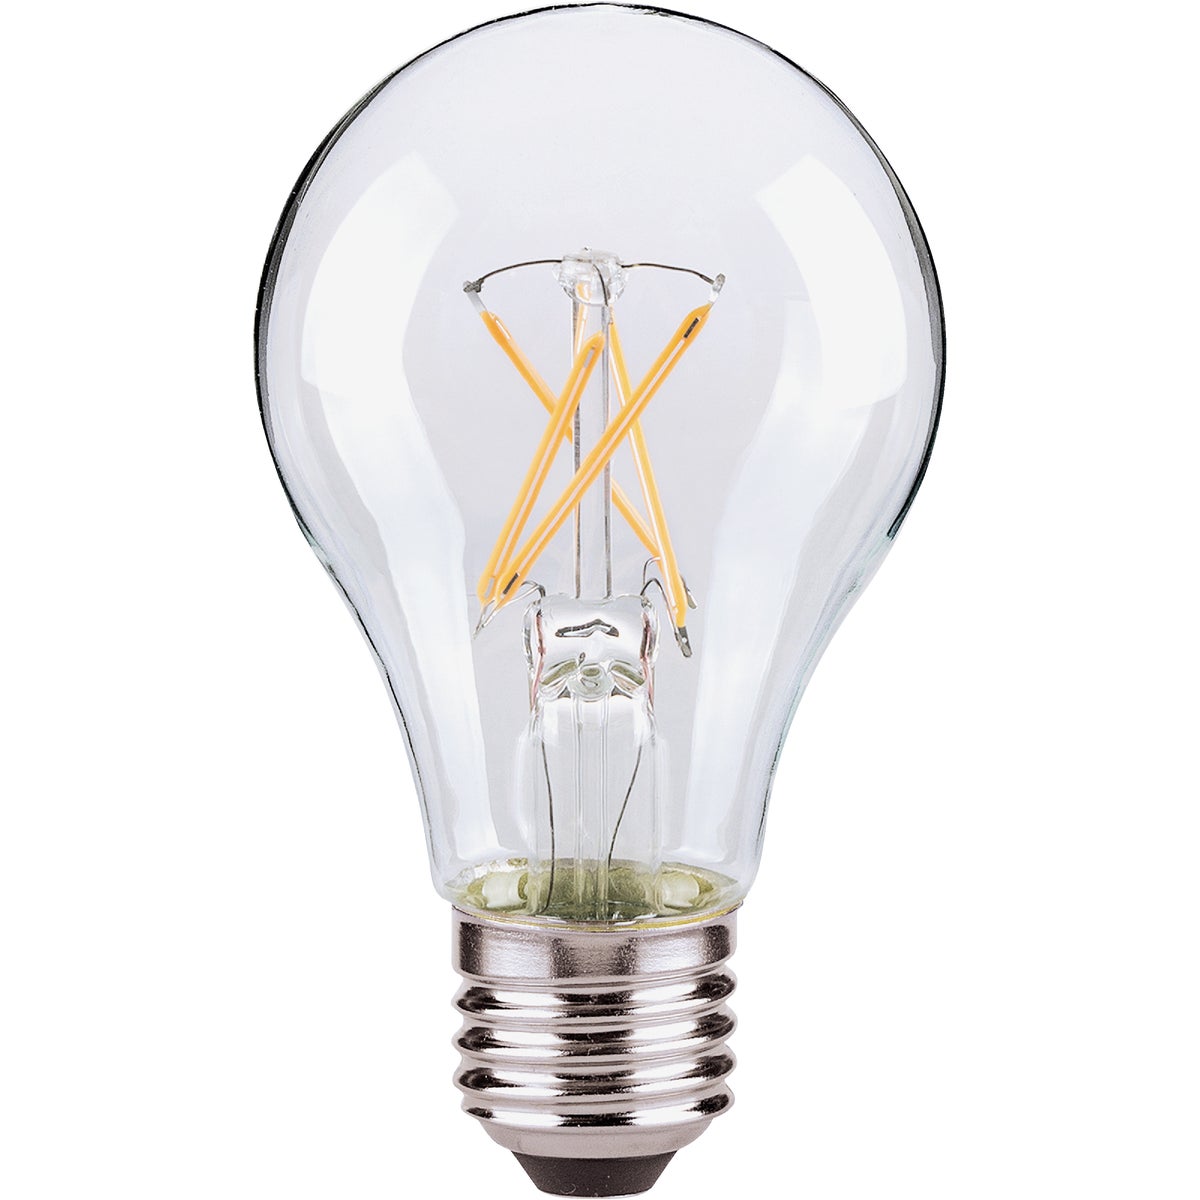 Satco 60W Equivalent Warm White A19 Medium Dimmable LED Light Bulb